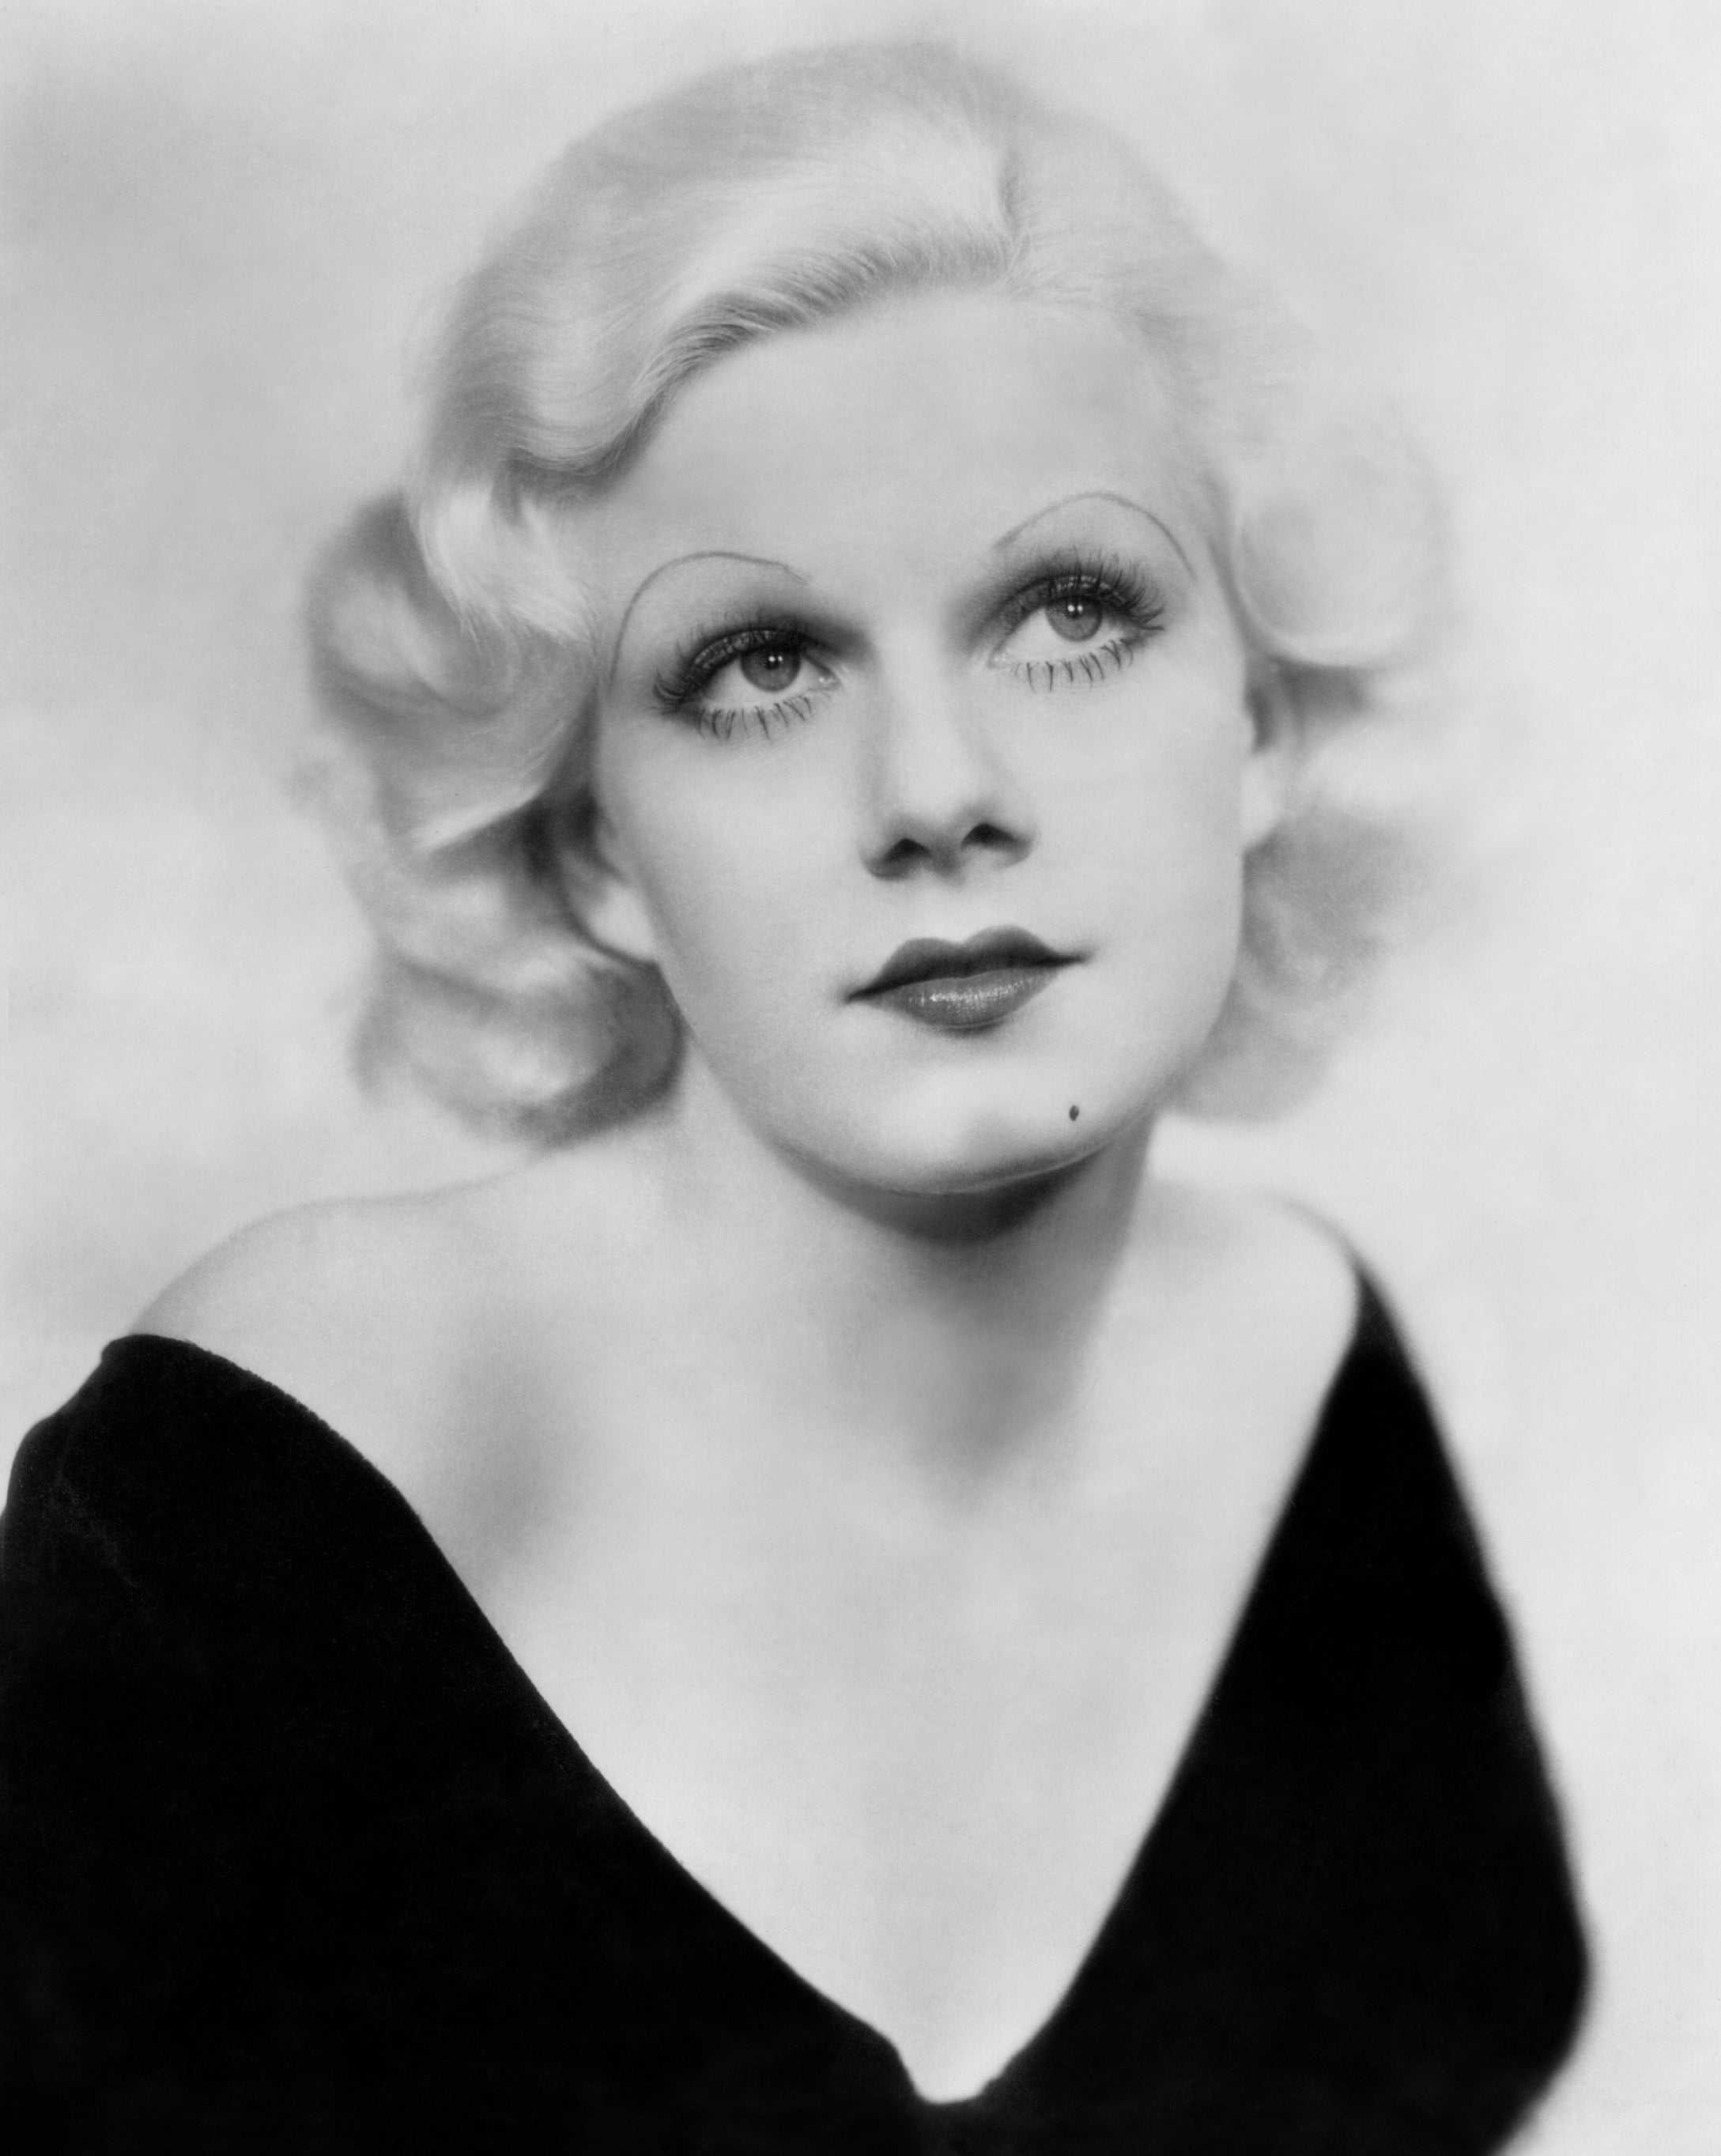 A portrait of Harlow